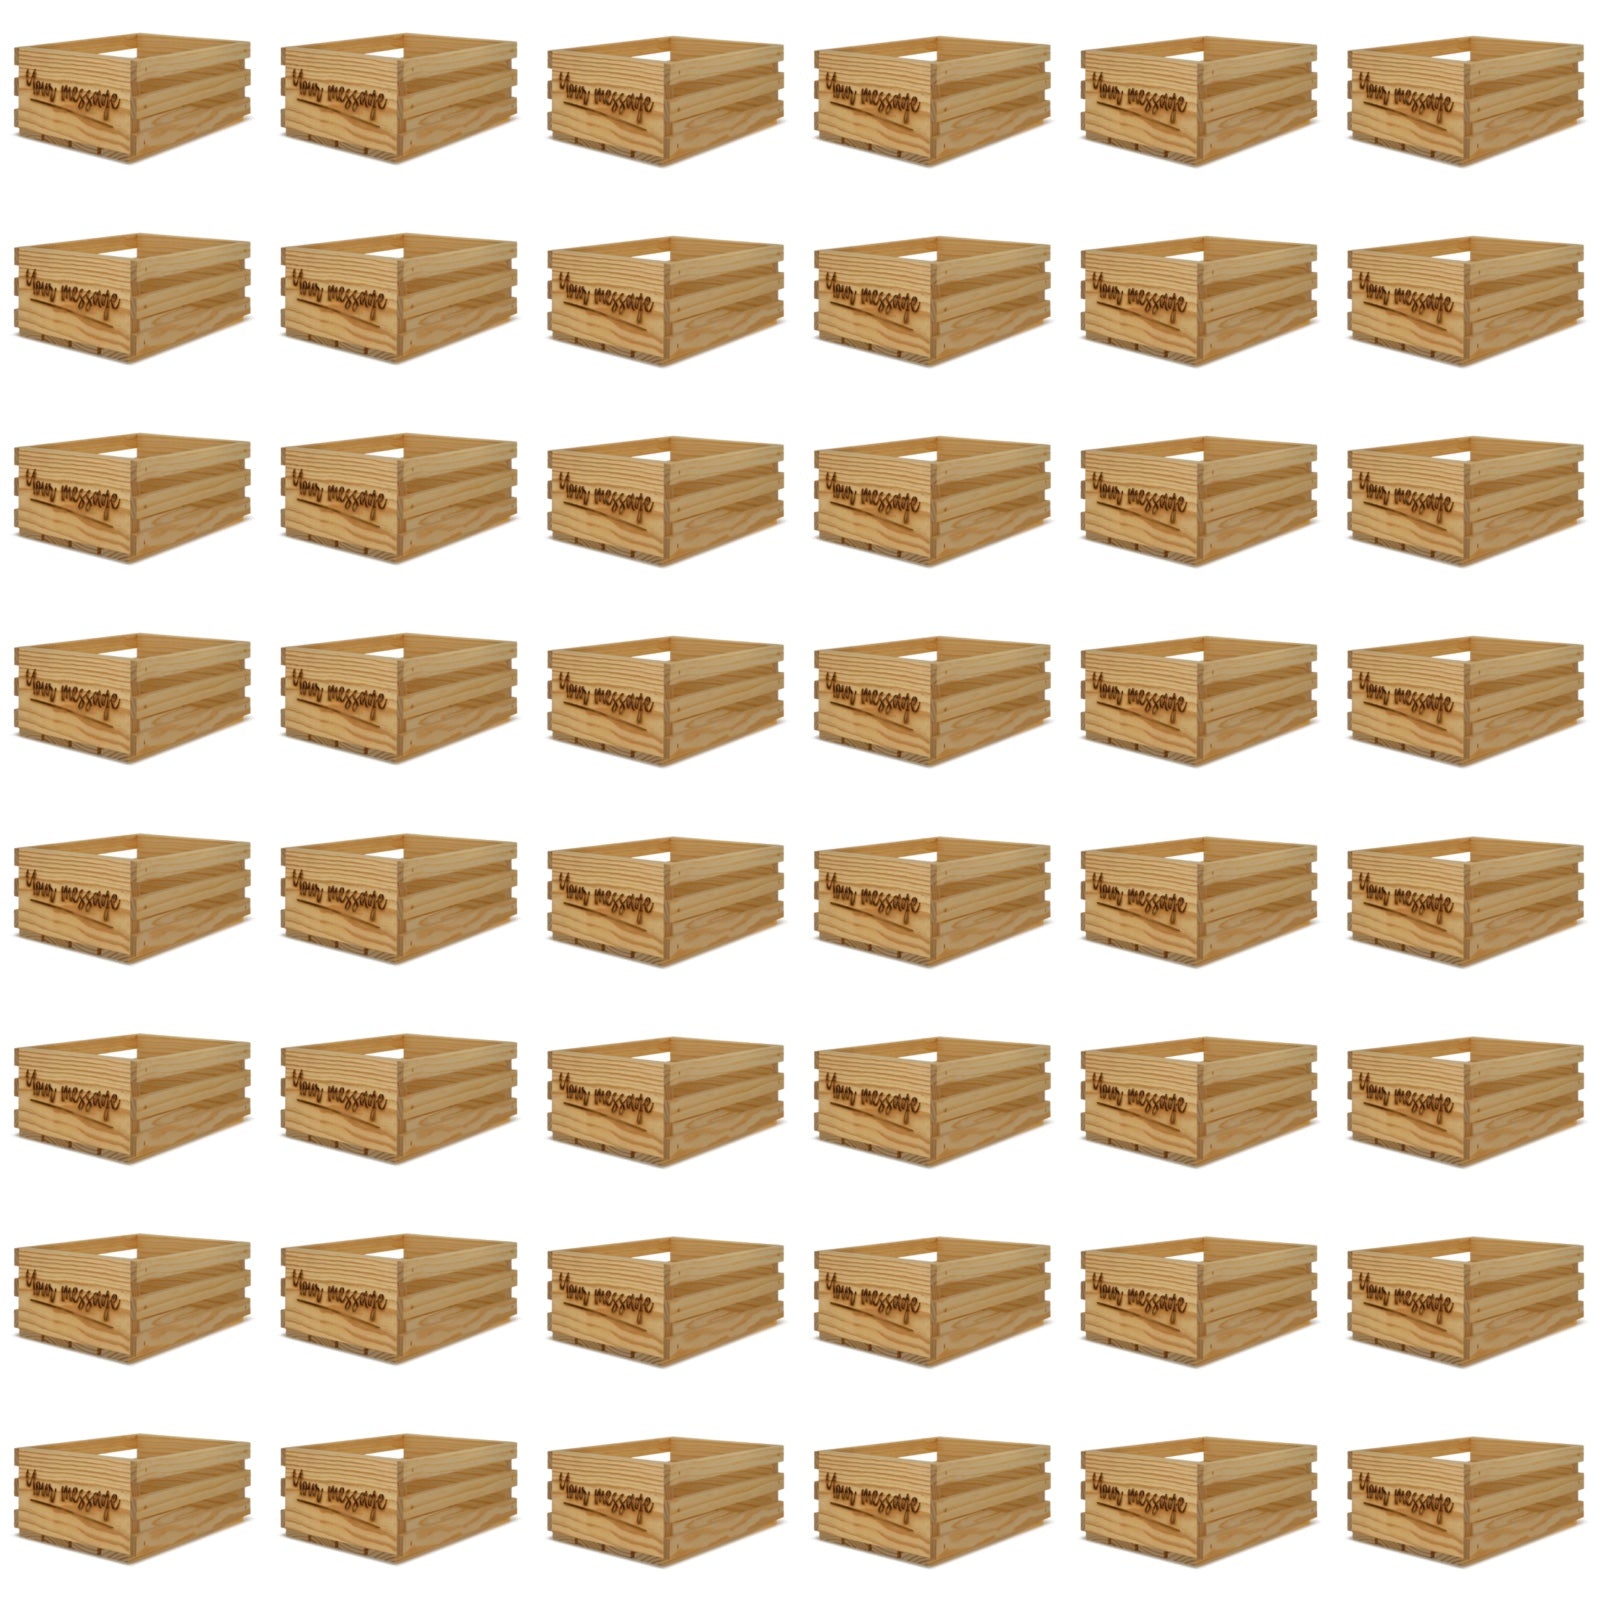 48 Small wooden crates 10x8x4.5 with your custom message